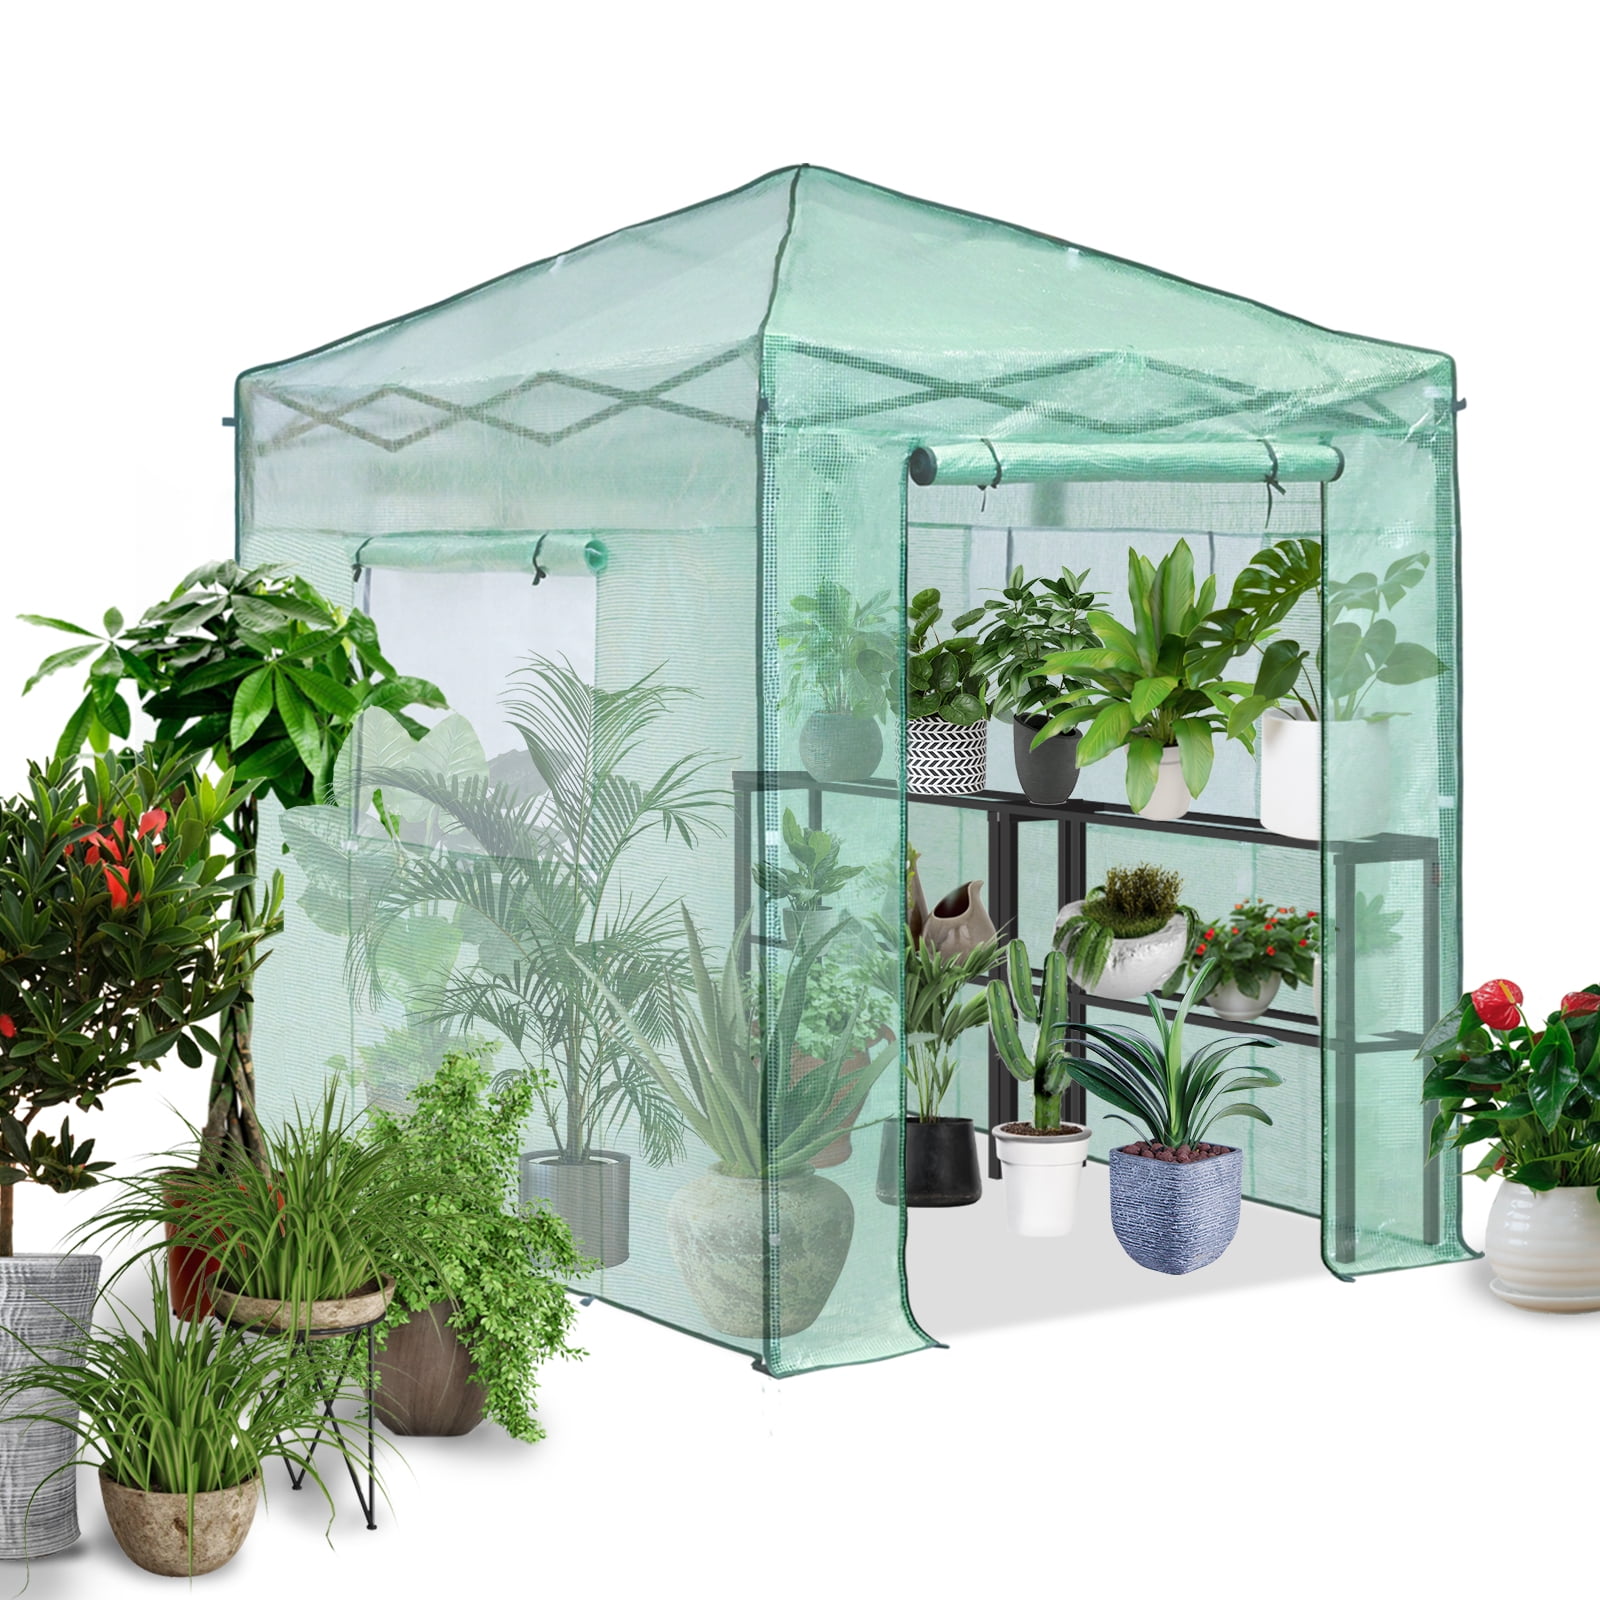 SESSLIFE Walk in Greenhouse, Portable Green House with Tiers Shelves,  Roll-up Zipper Door and PE Cover, TE2540